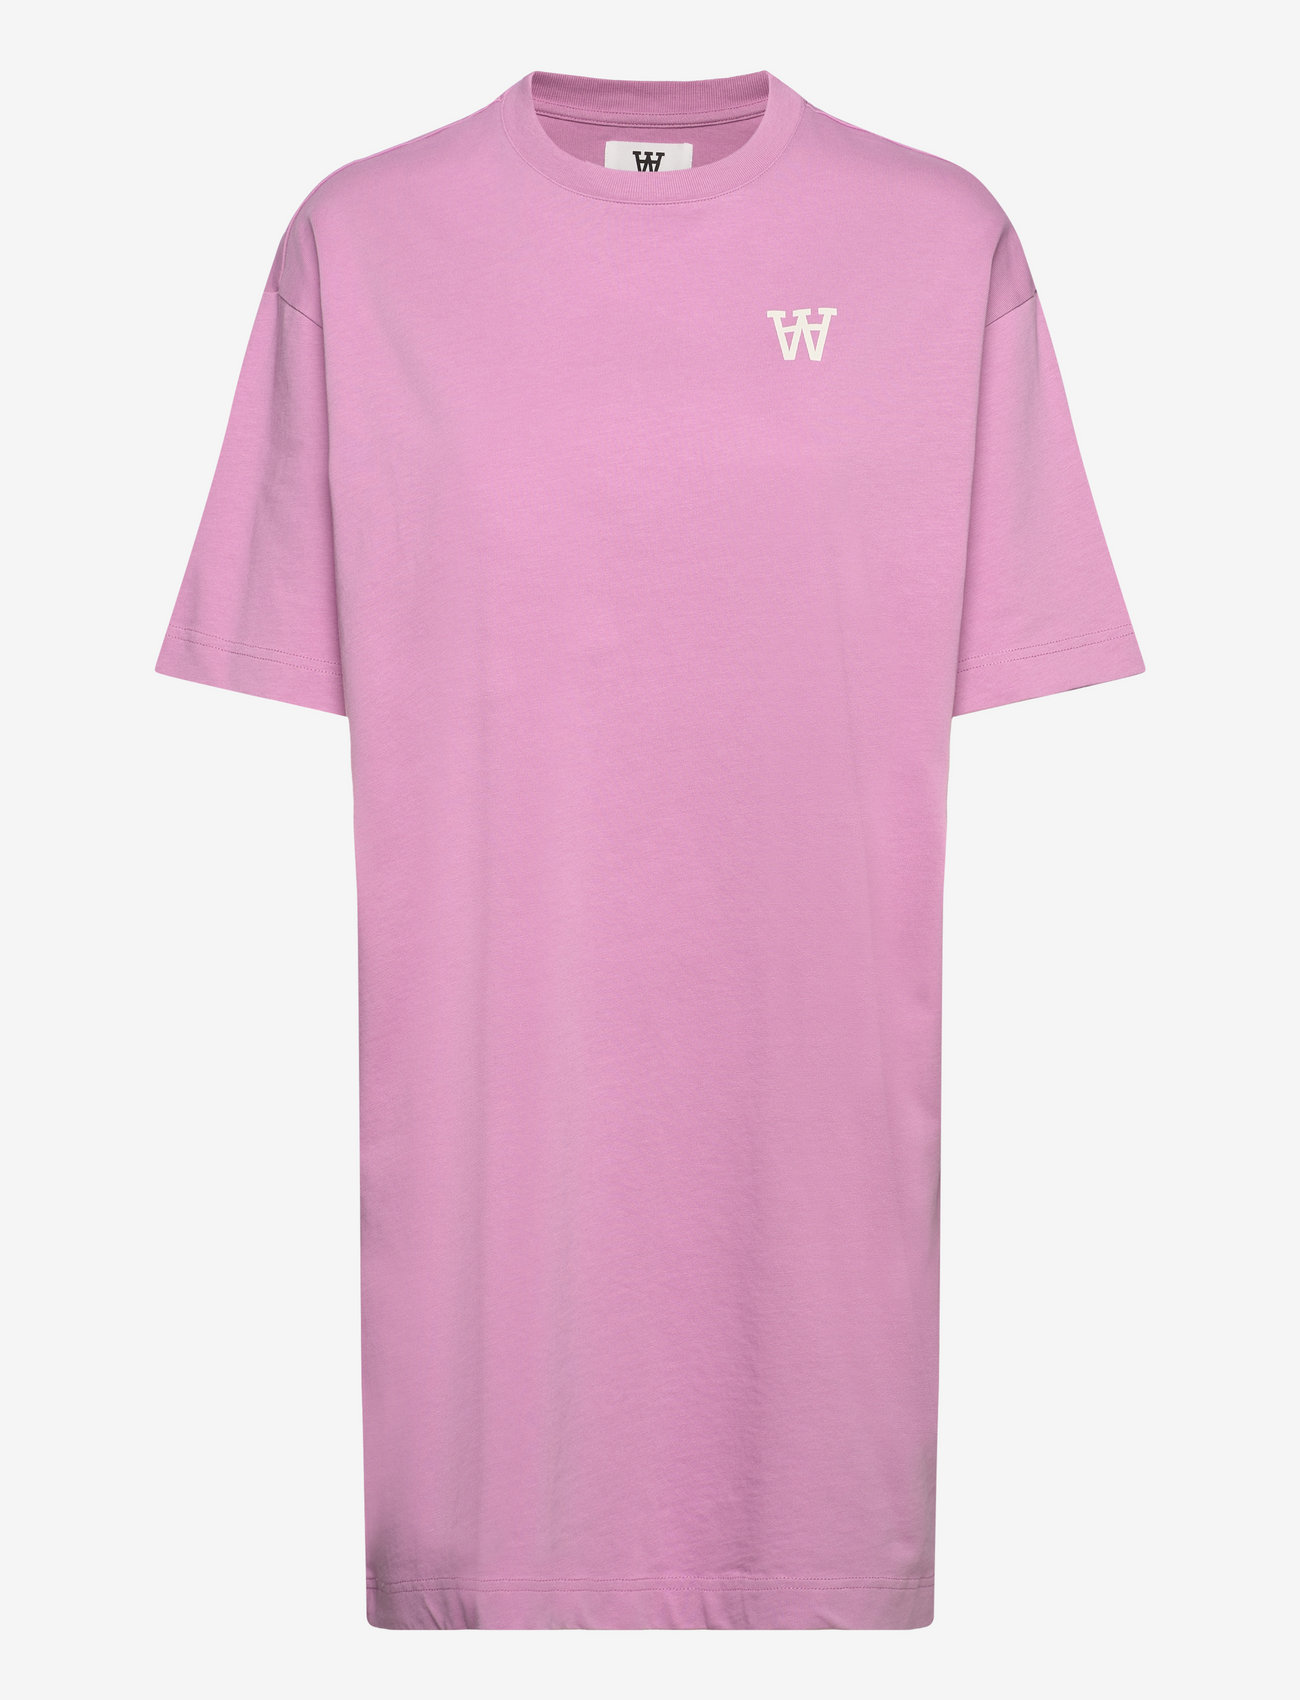 Double A by Wood Wood - Ulla AA dress - t-shirt dresses - rosy lavender - 0